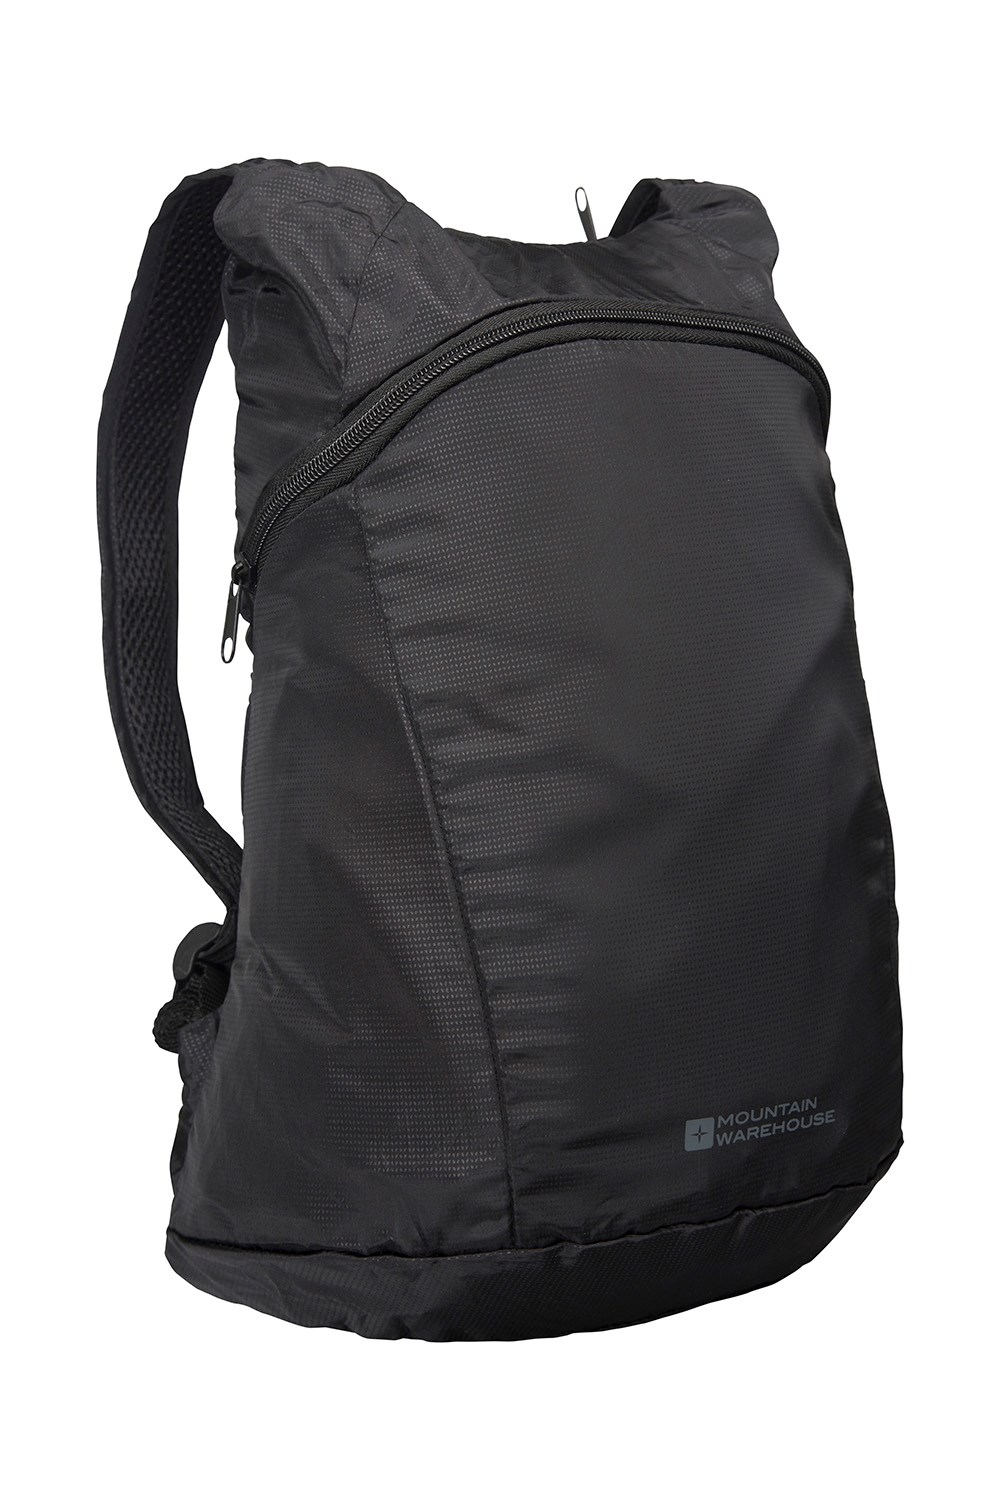 Mountain Warehouse Packaway Backpack One Size Black 024152 for sale ...